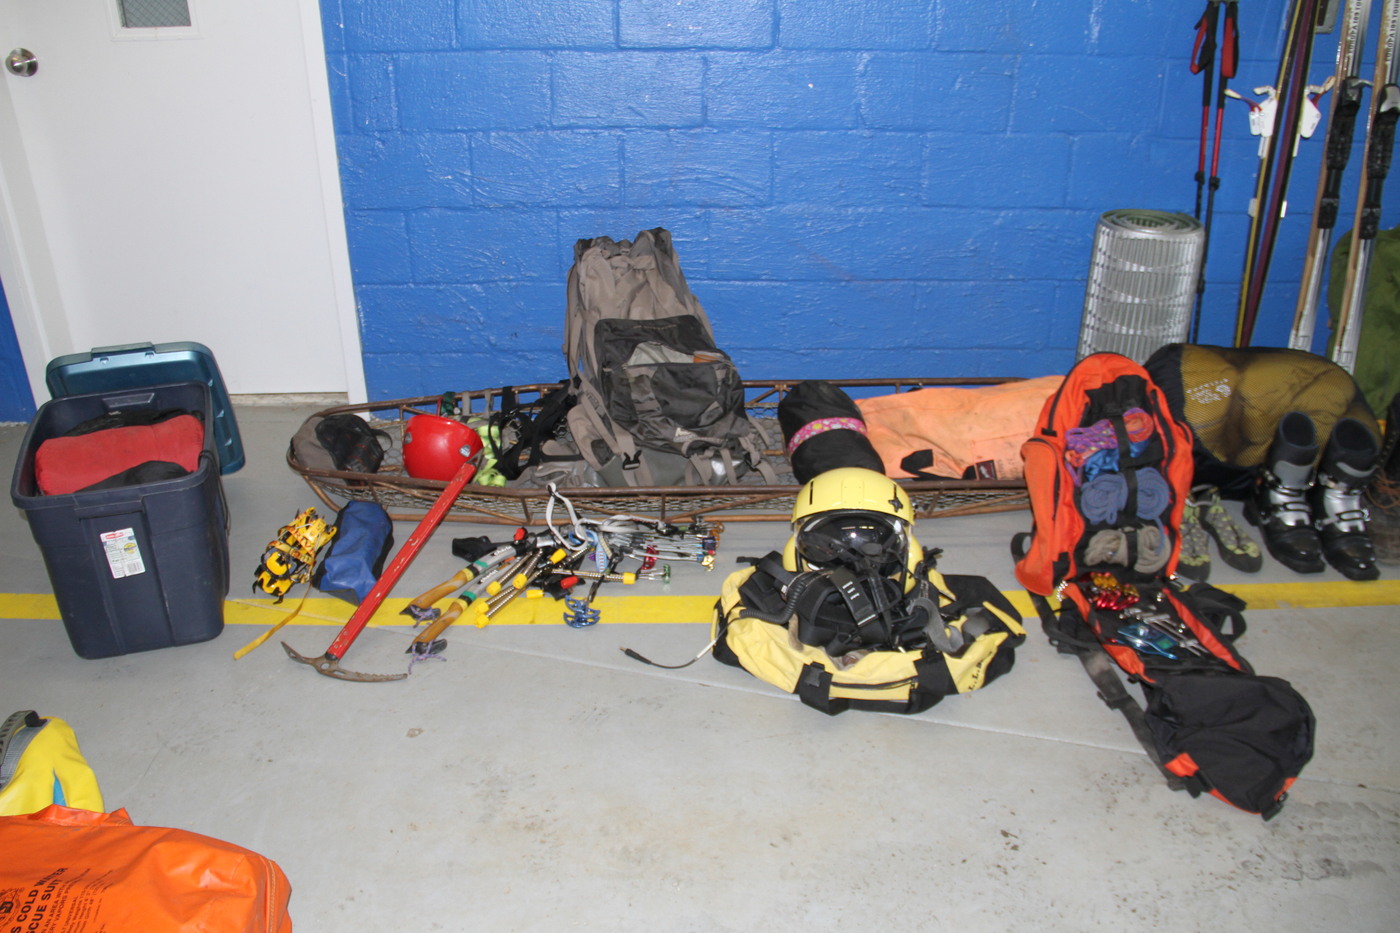 Mountain rescue equipment used by a search and rescue team